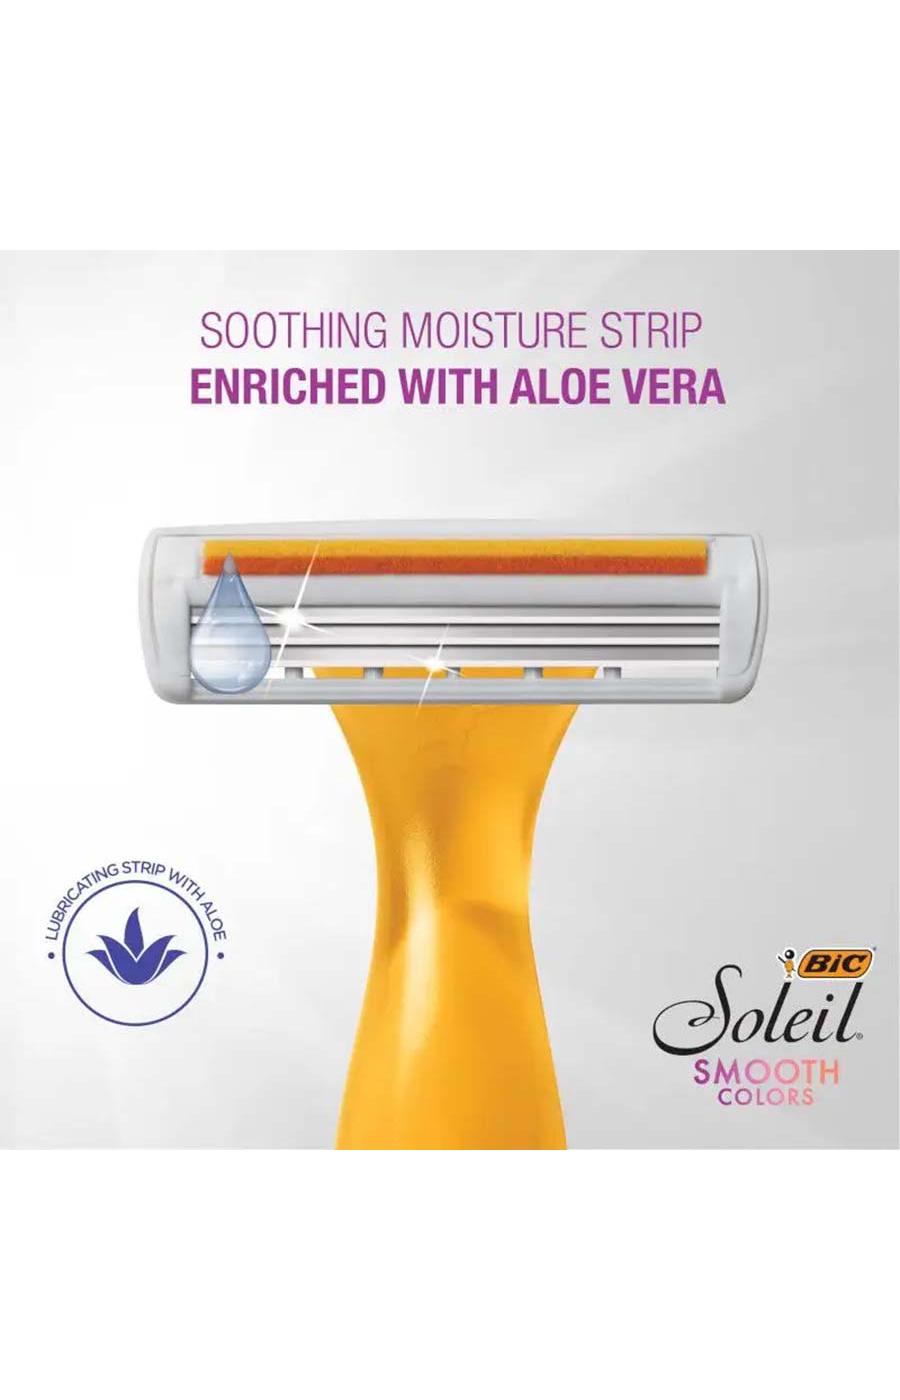 BIC Soleil Smooth 3 Blades Disposable Razors; image 3 of 4